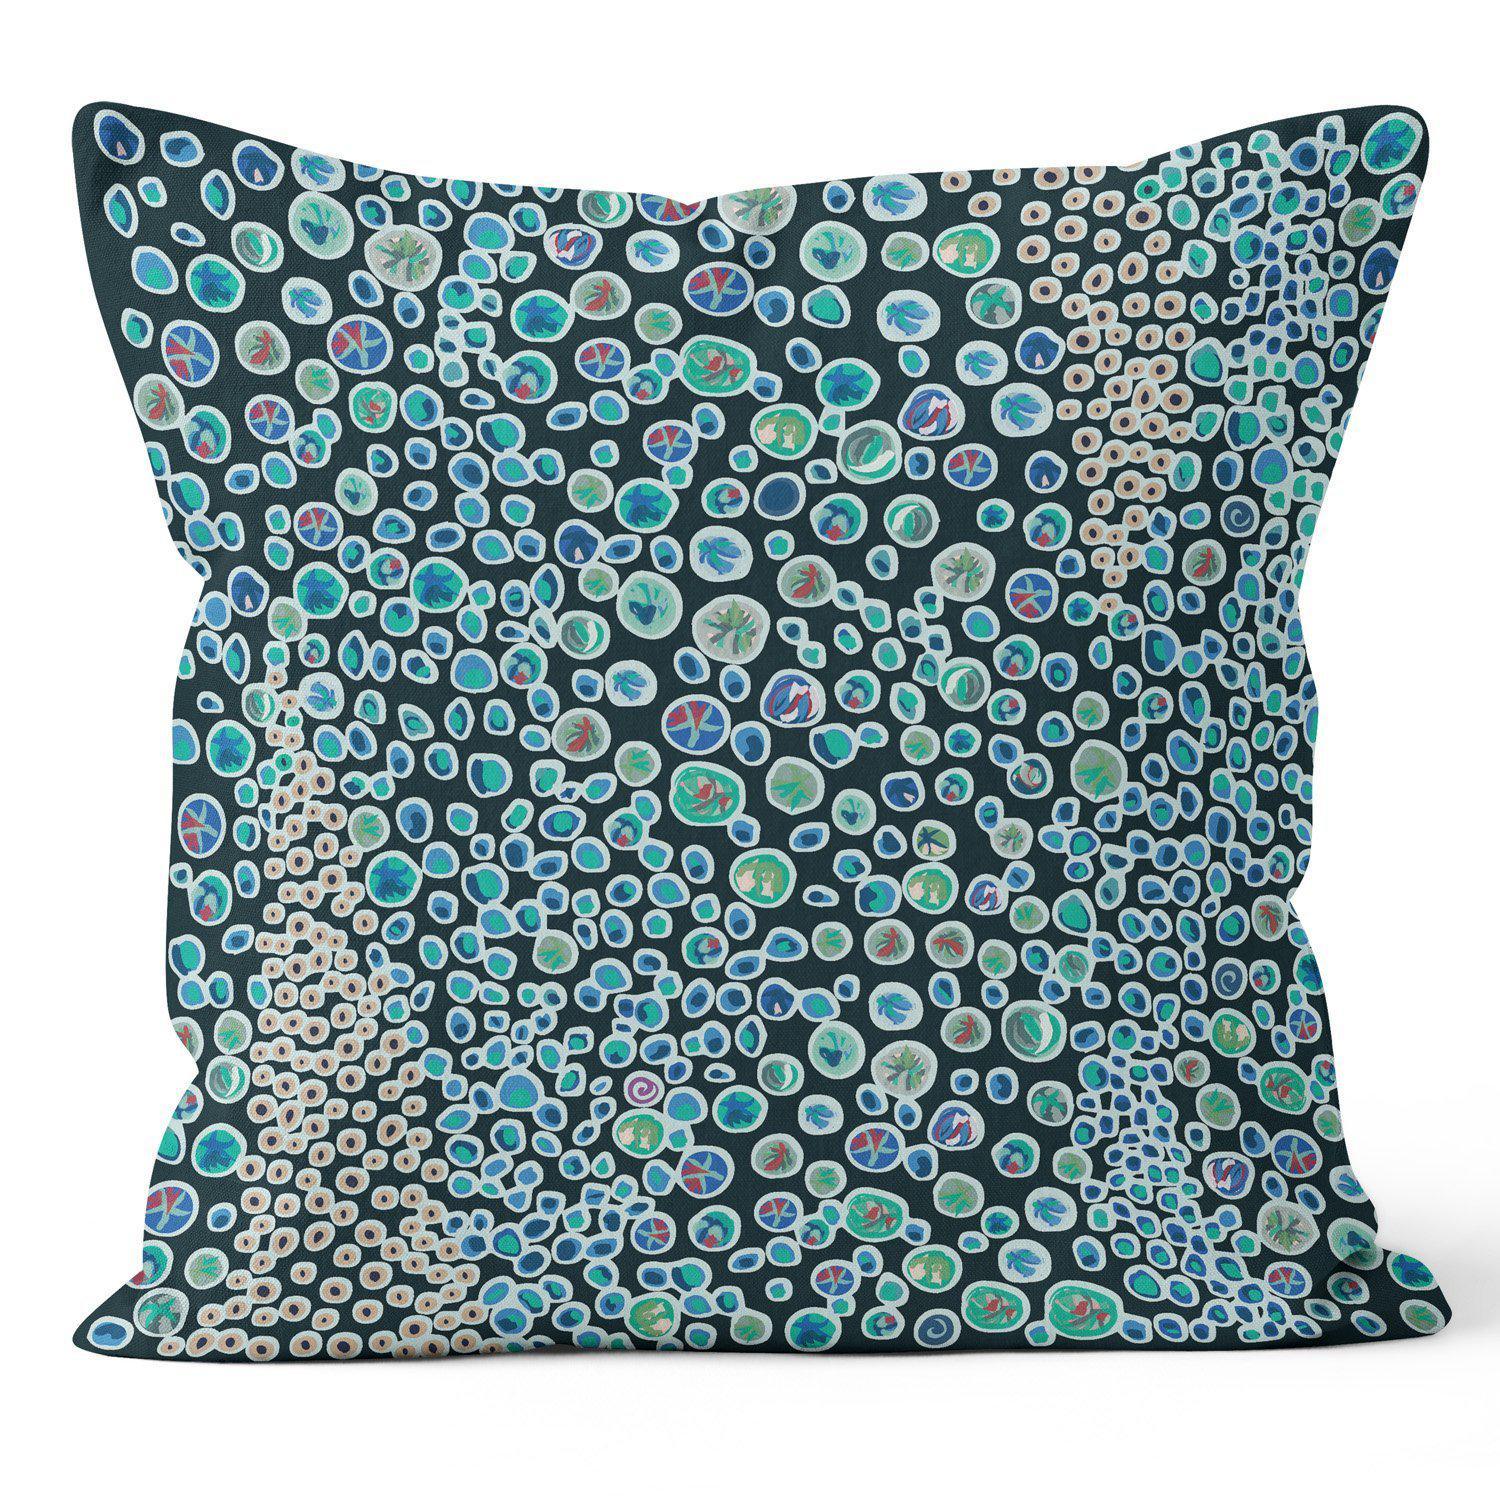 Bubbles (Green) - Funky Art Cushion - Bellissima - House Of Turnowsky Pillows - Handmade Cushions UK - WeLoveCushions